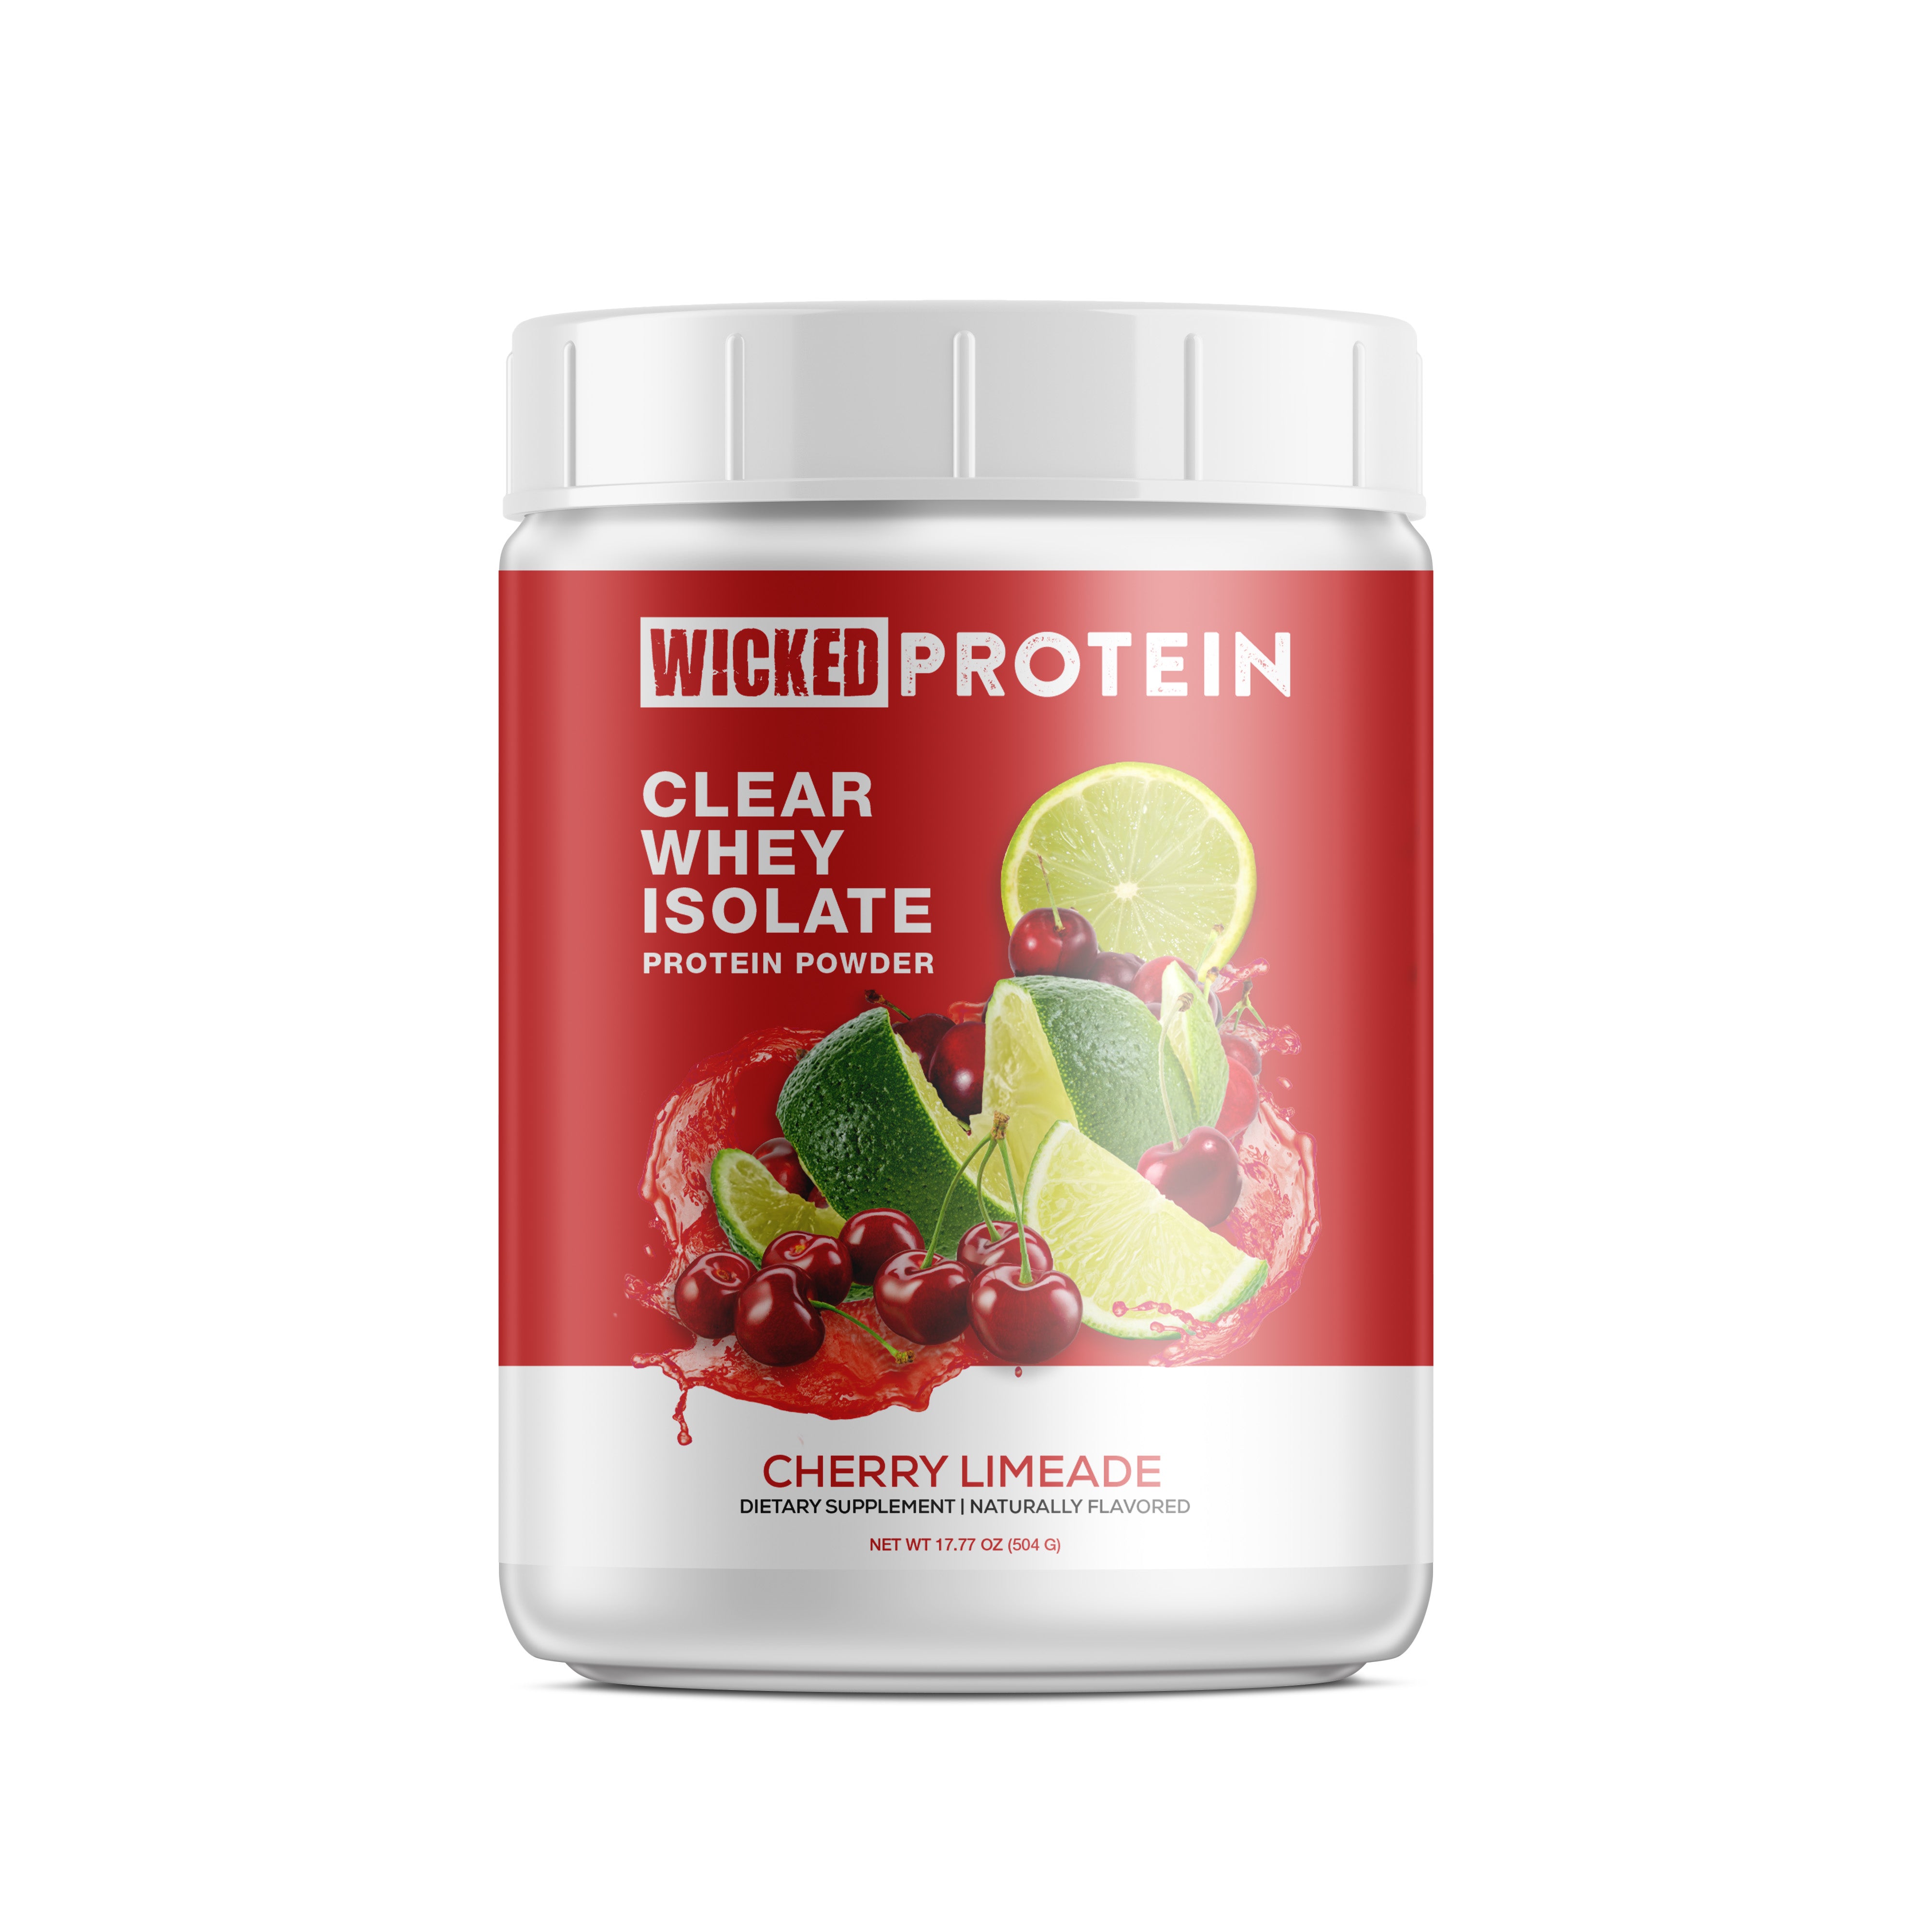 WICKED Cherry Limeade Clear Whey Isolate Protein Powder